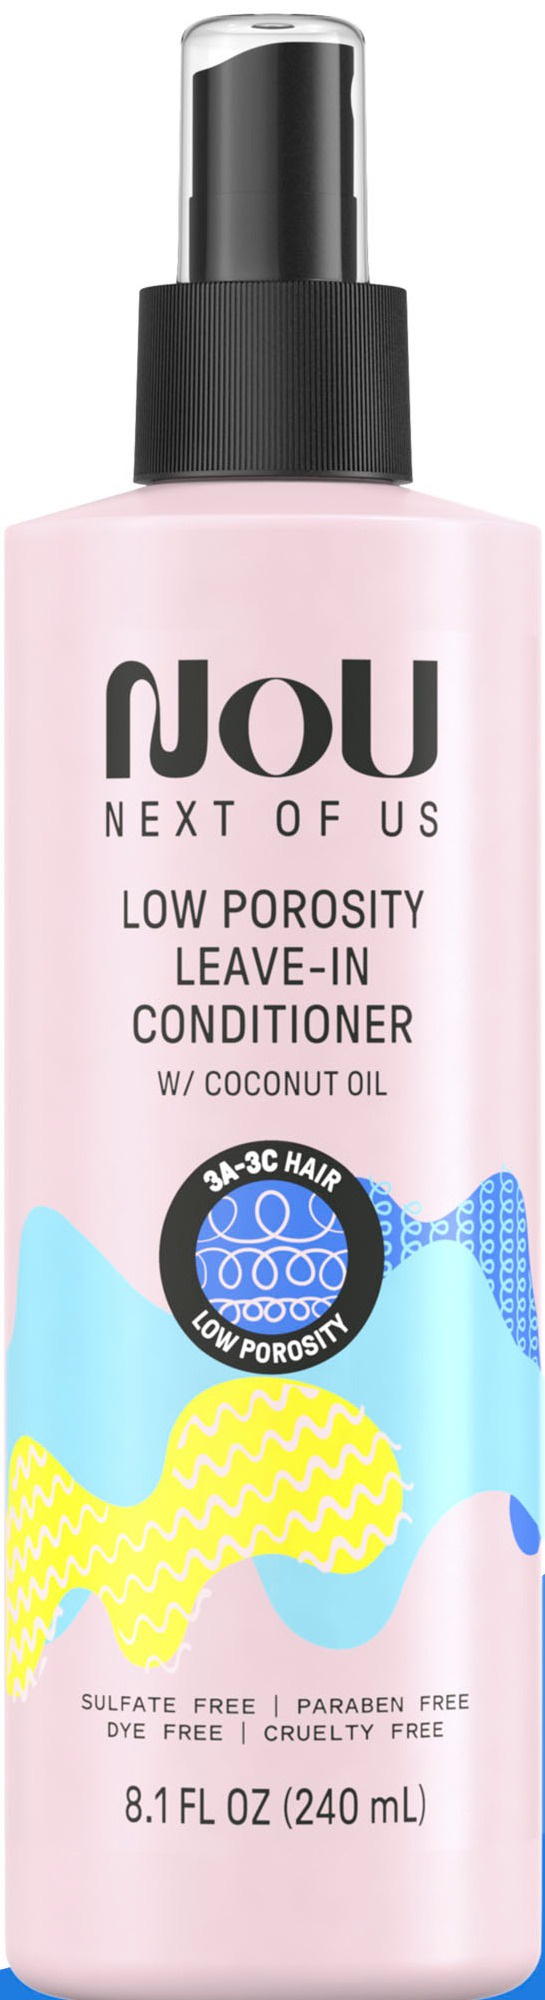 Next of Us Low Porosity Leave In Conditioner